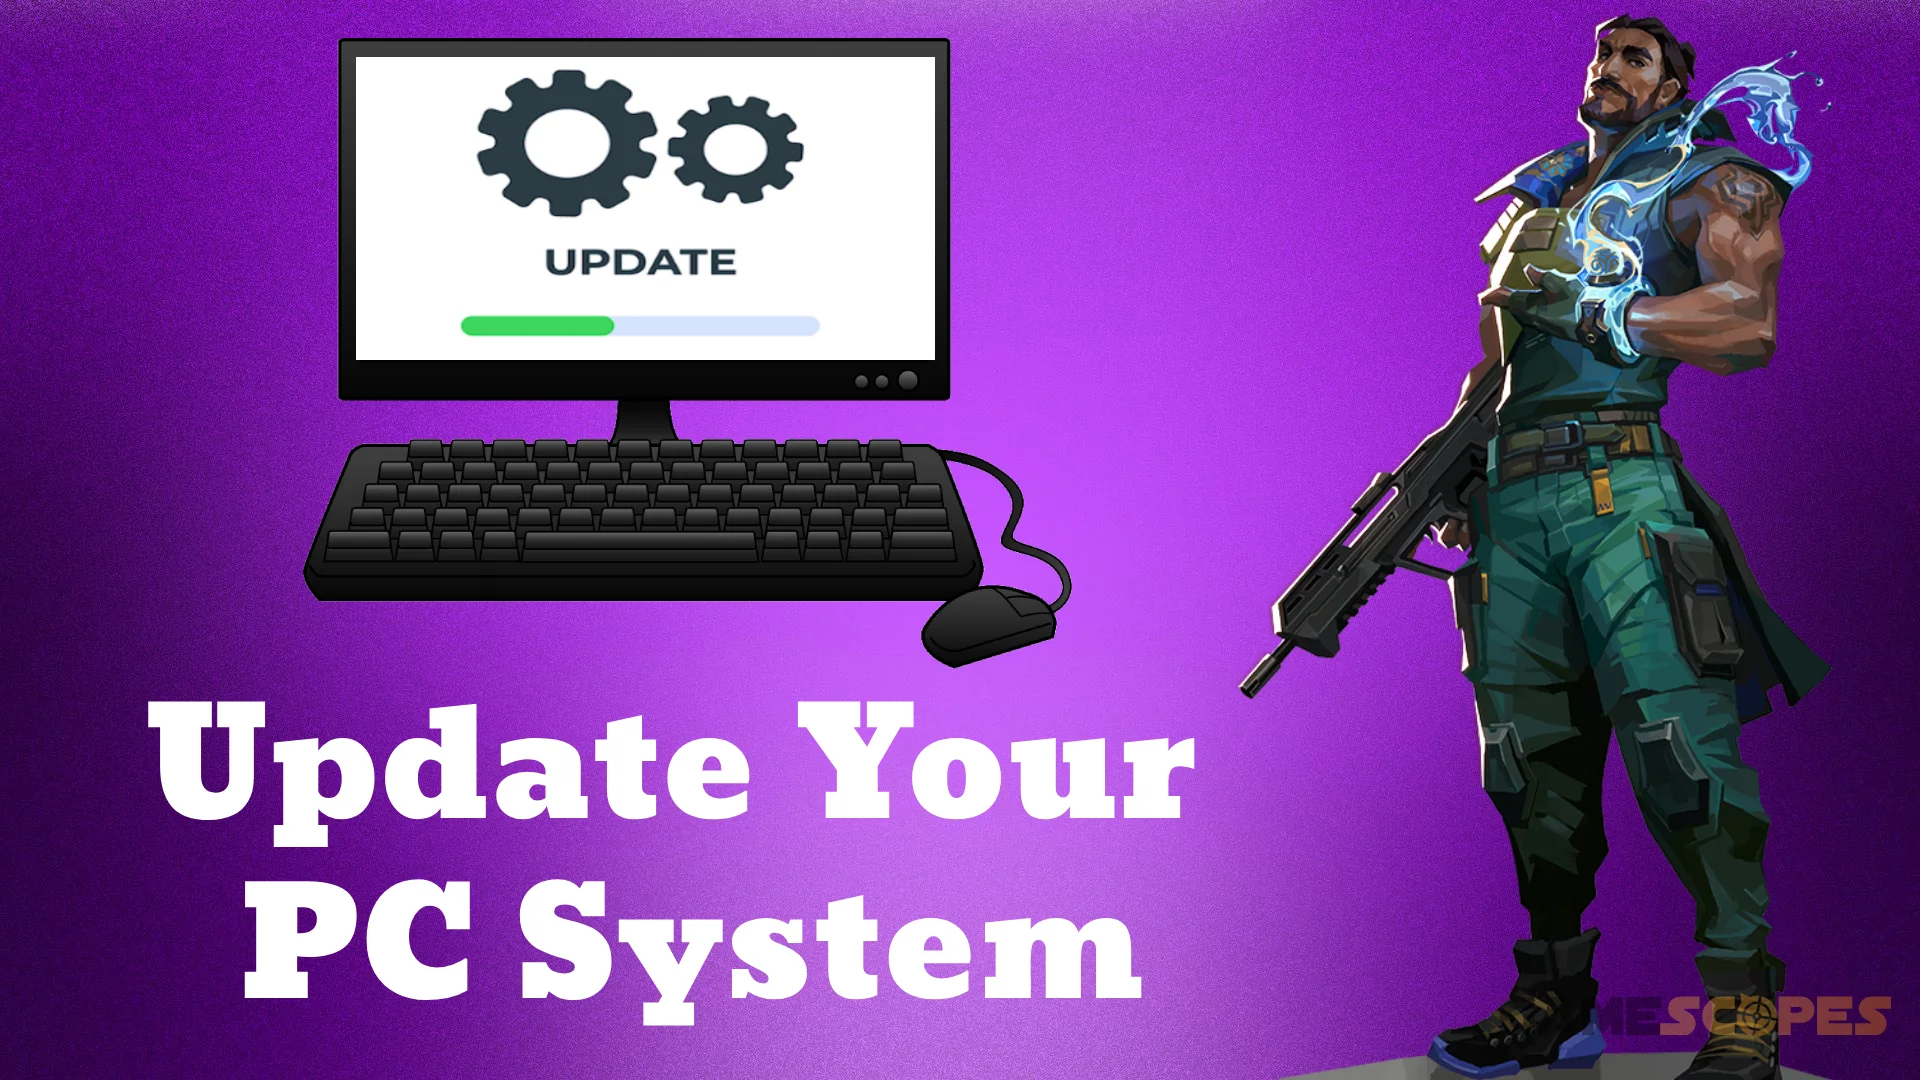 When Valorant keeps crashing on startup, you need to update your PC system.